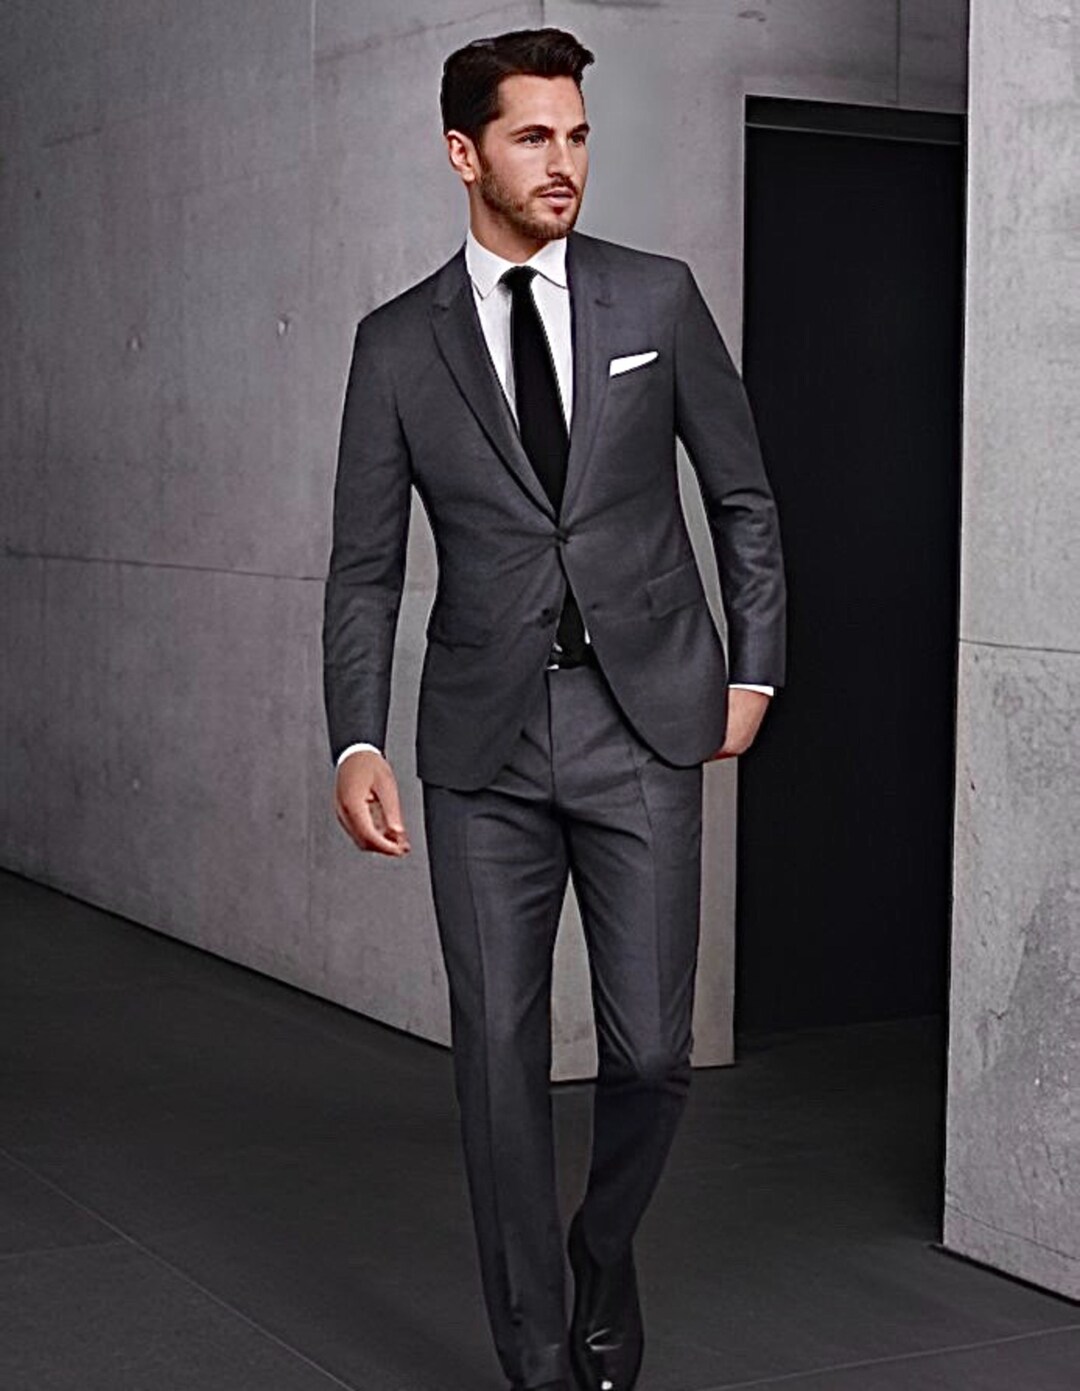 Menista Suit Stylish Two Piece Grey Mens Suit for Wedding - Etsy